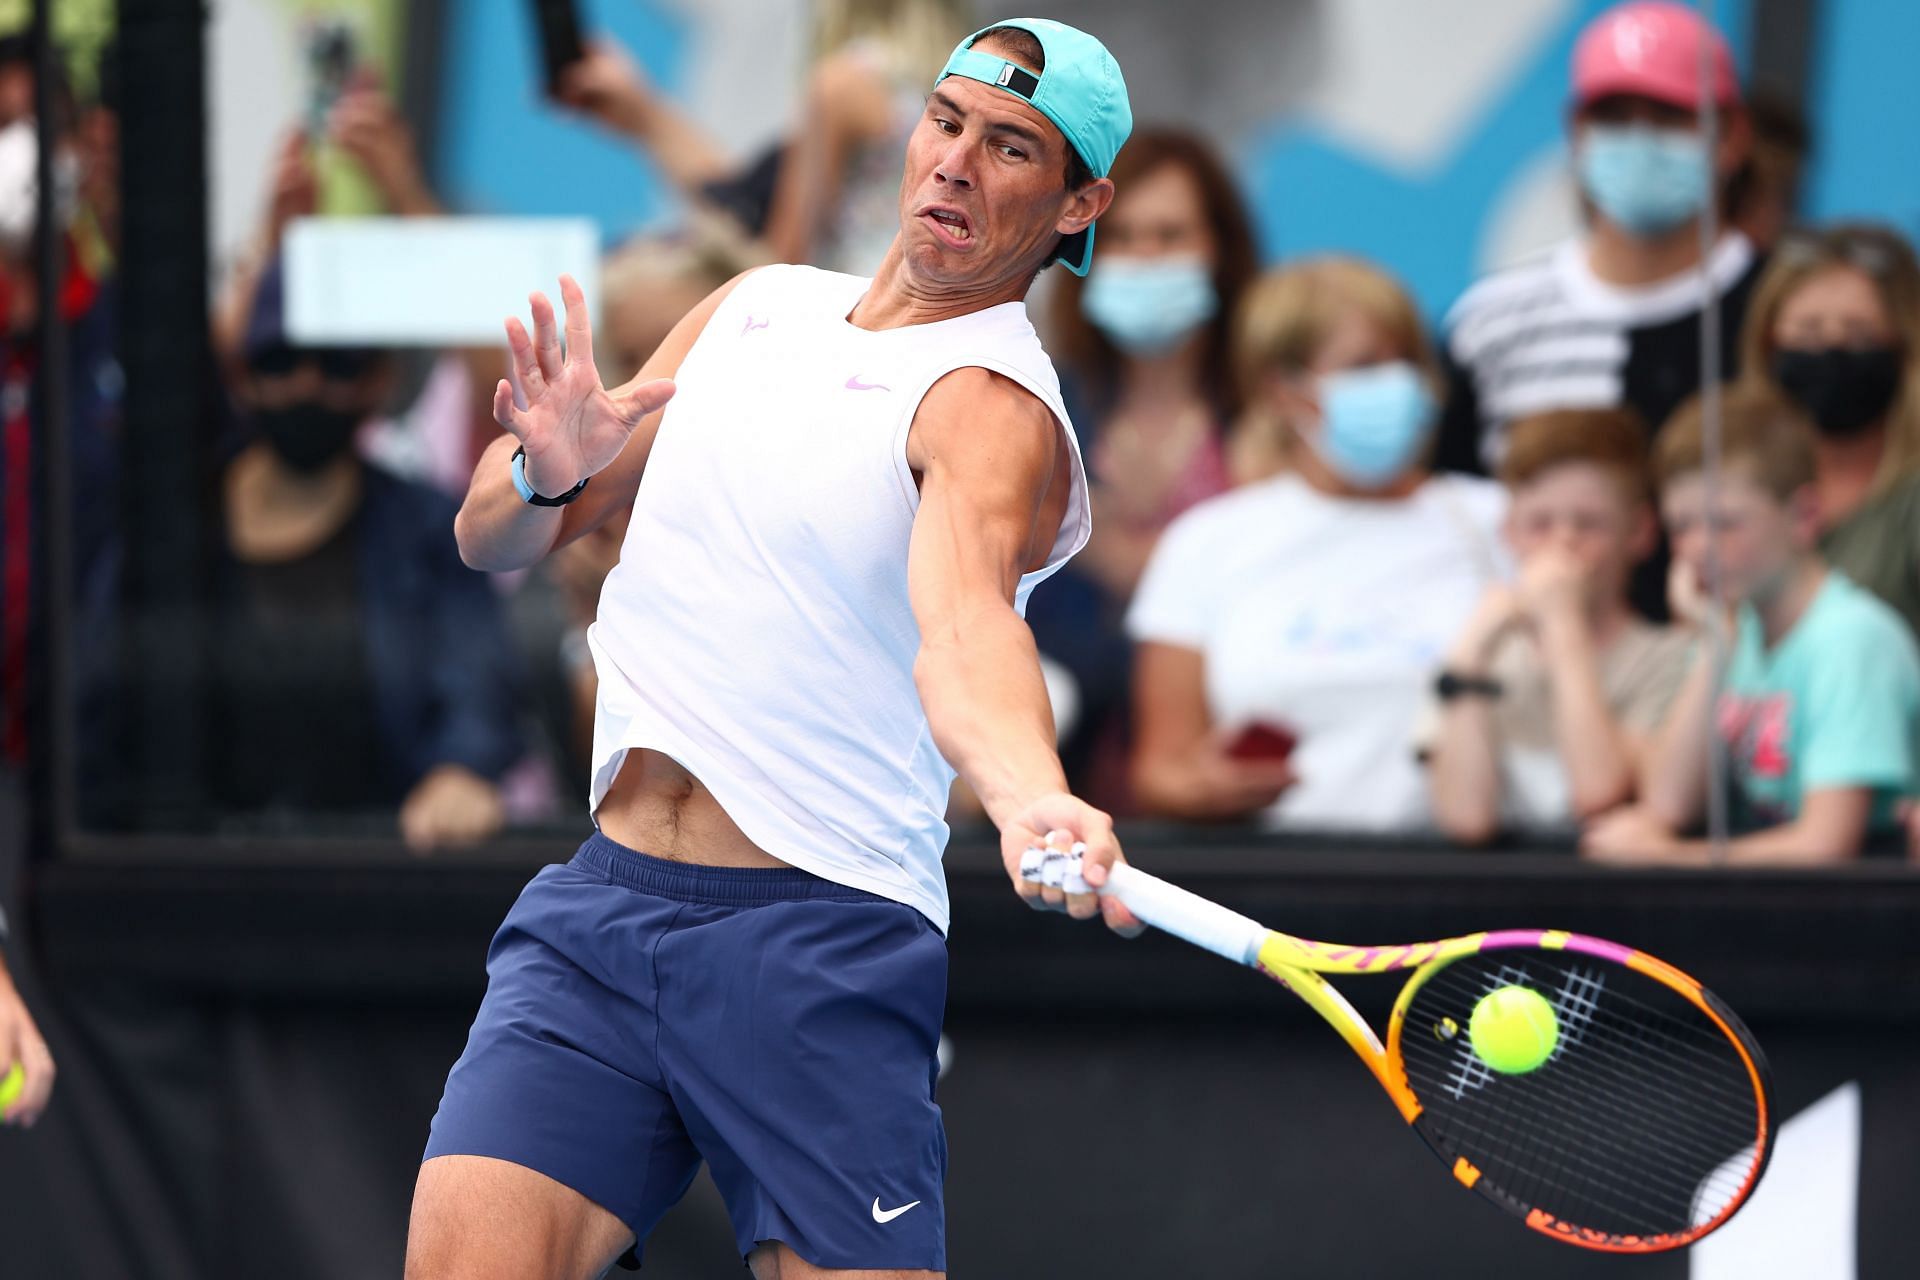 Rafael Nadal will try to win his 21st Grand Slam on Sunday